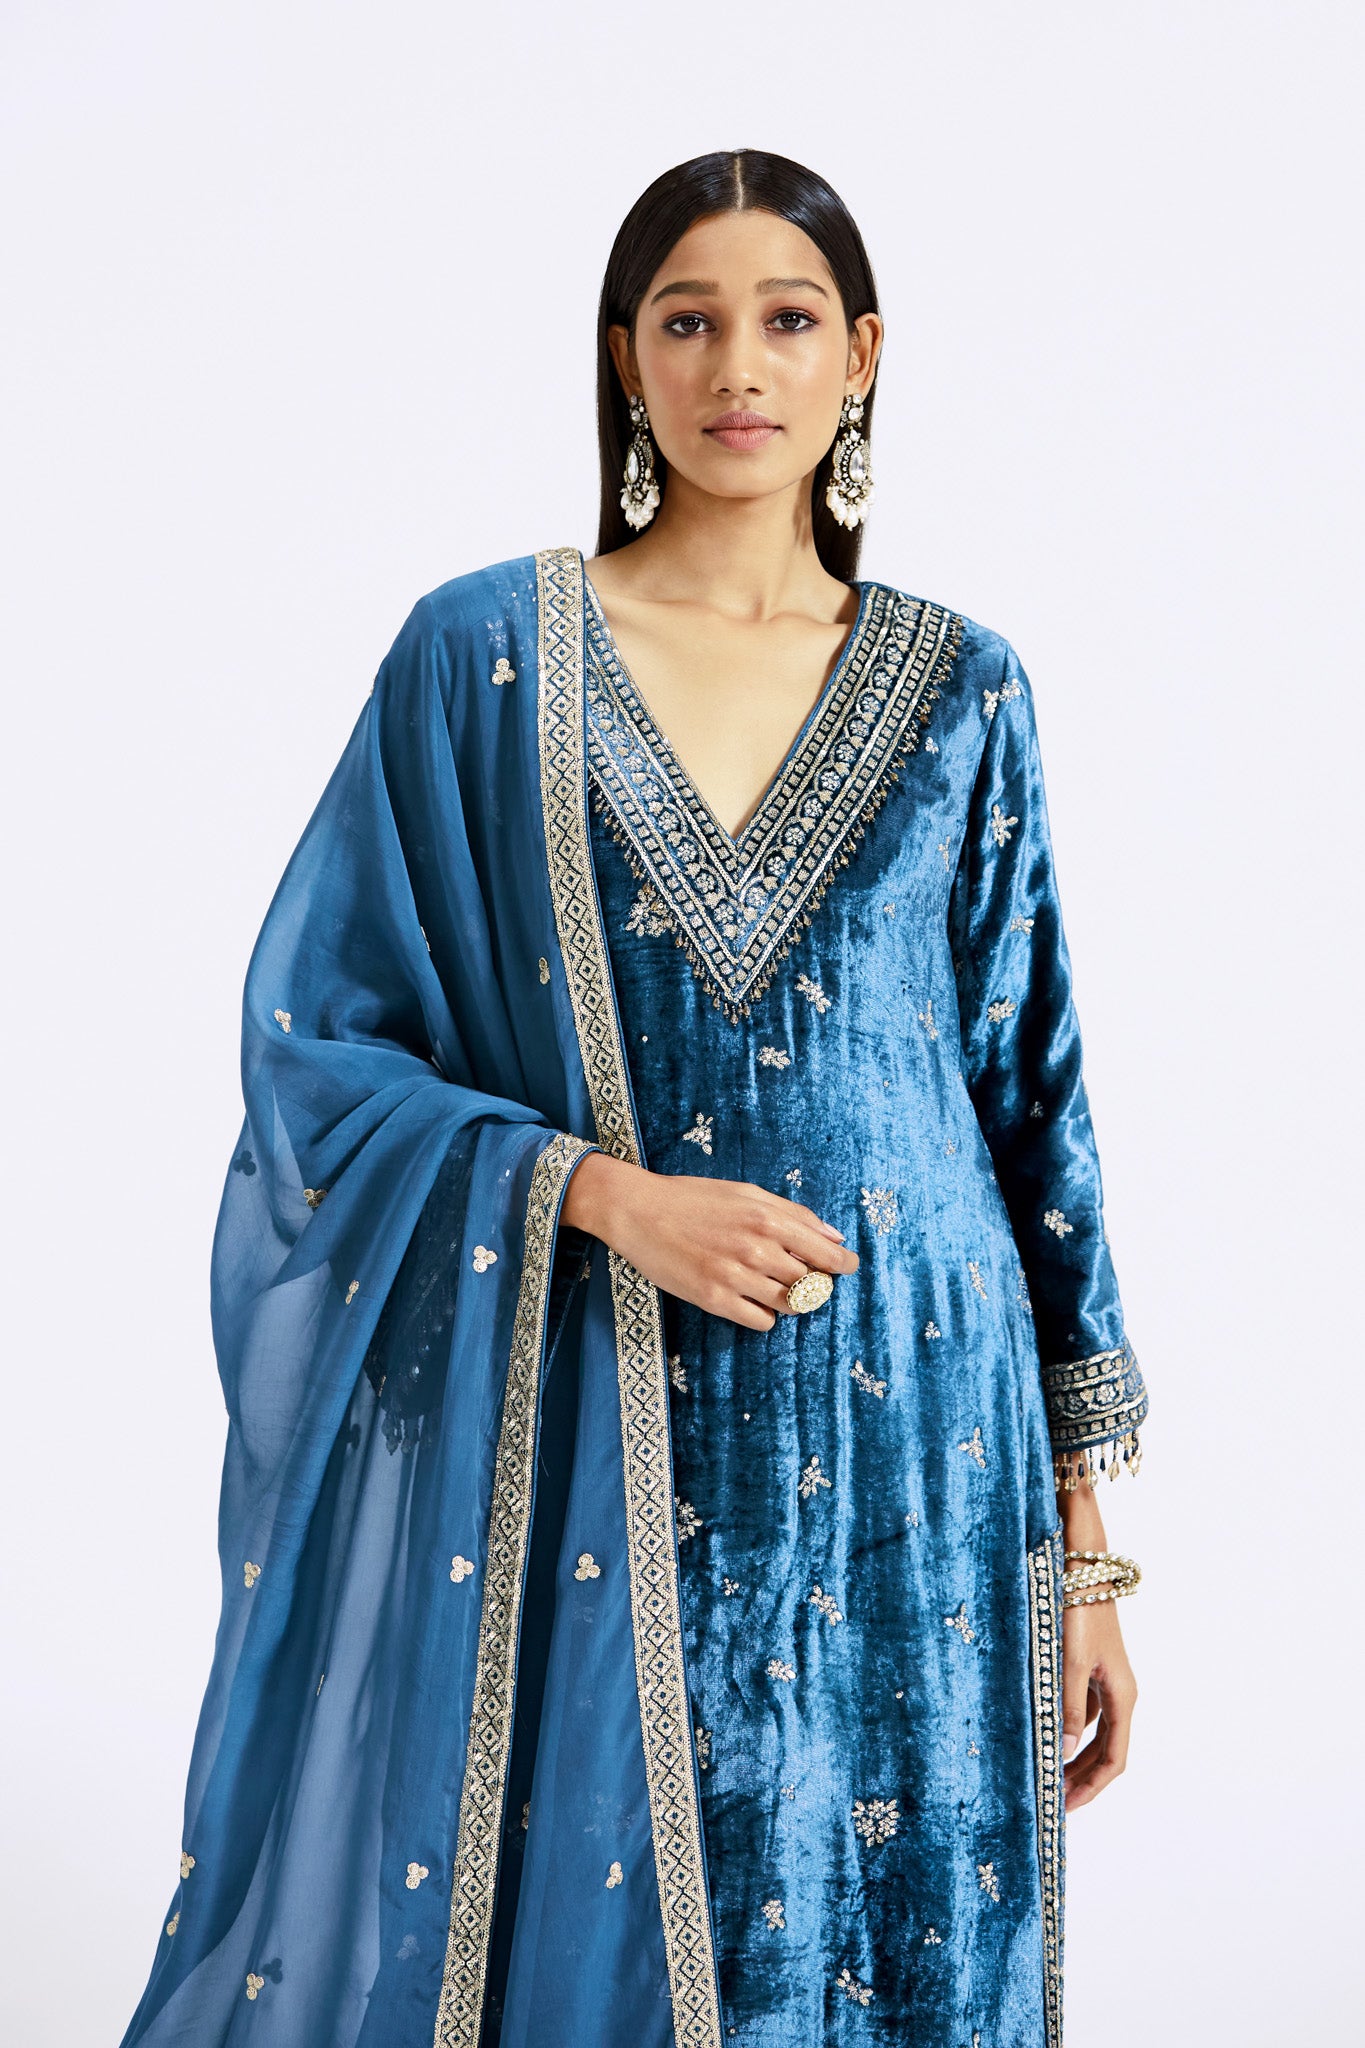 Buy blue velvet embroidered sharara suit online in USA with dupatta. Shop the best and latest designs in embroidered sarees, designer sarees, Anarkali suit, lehengas, sharara suits for weddings and special occasions from Pure Elegance Indian fashion store in USA.-closeup